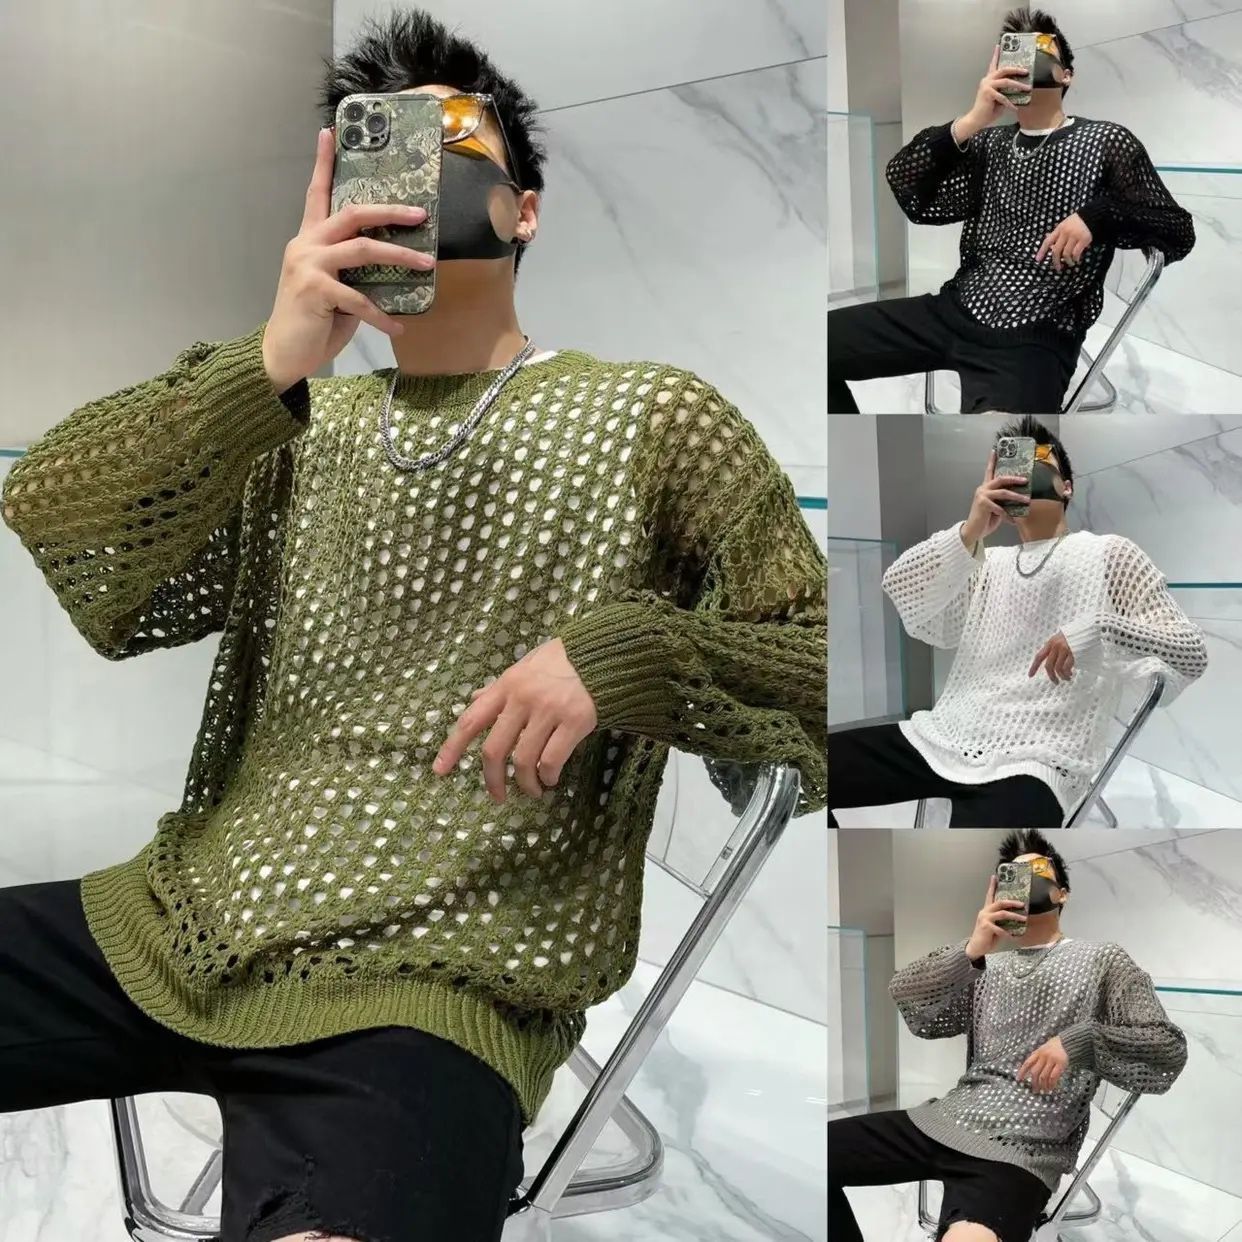 Design sense hollow knitted sweater long-sleeved  summer new fashion niche personality sweater summer round neck trend